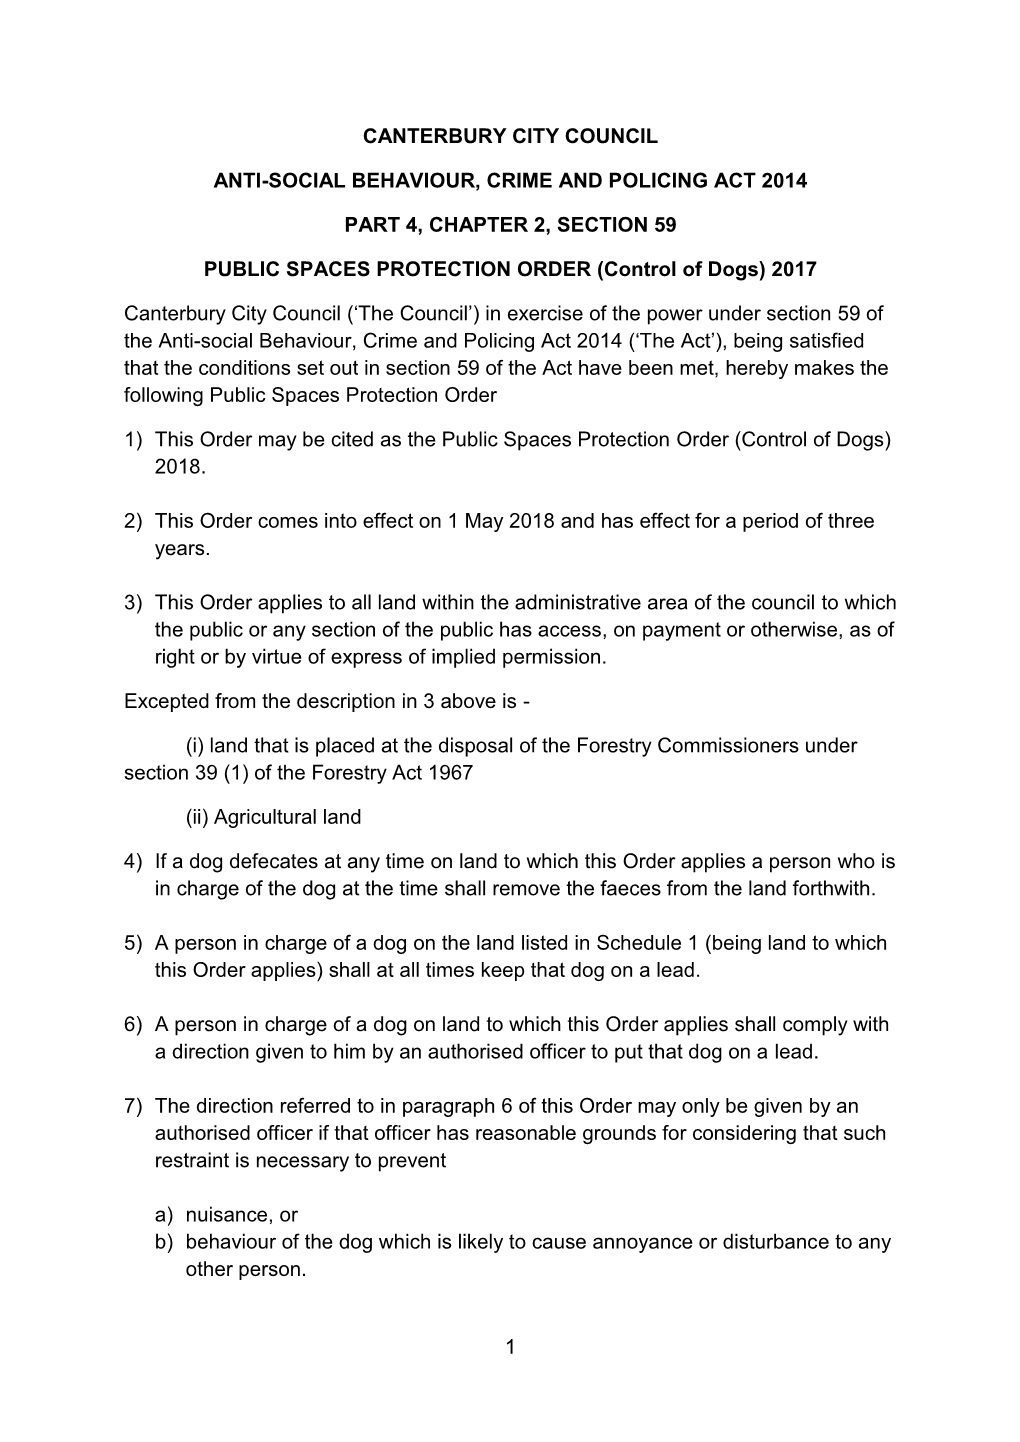 PUBLIC SPACES PROTECTION ORDER (Control of Dogs) 2017